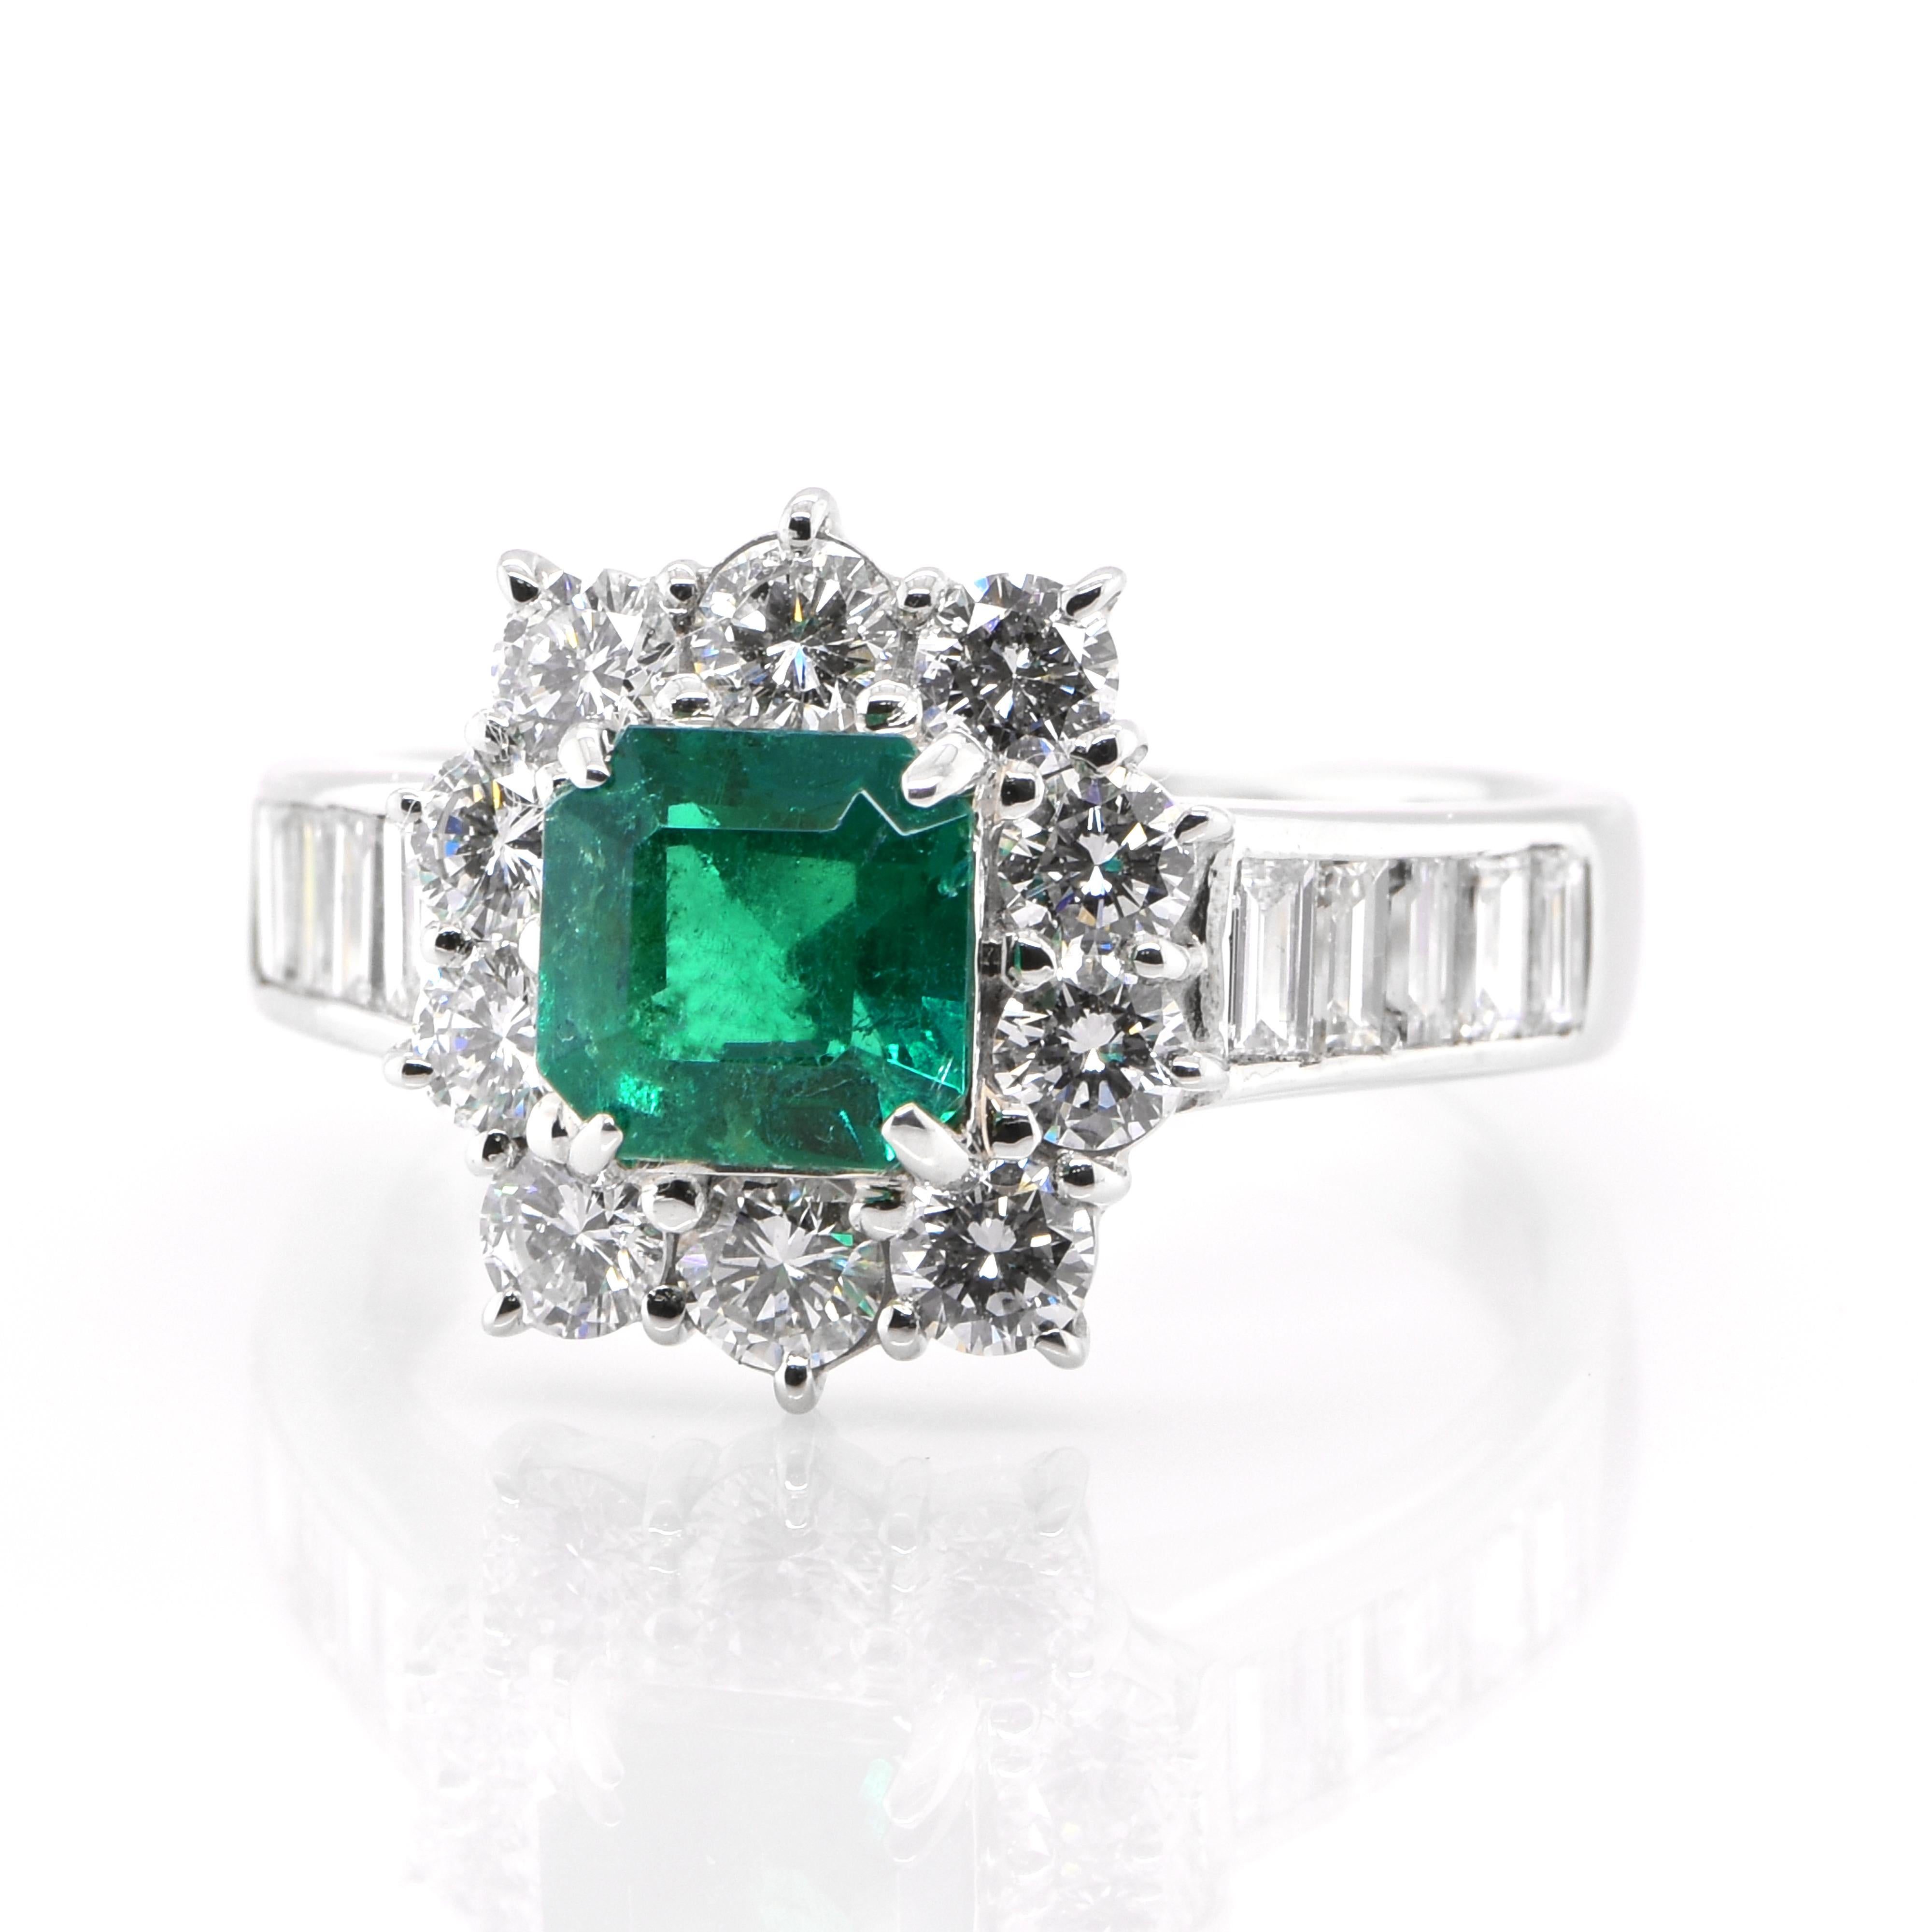 A stunning Engagement ring featuring a 0.94 Carat, Natural, Emerald and 1.28 Carats of Diamond Accents set in Platinum. The Emerald displays very good color and clarity which is rare for most Emeralds set in jewelry! The ring is great for everyday